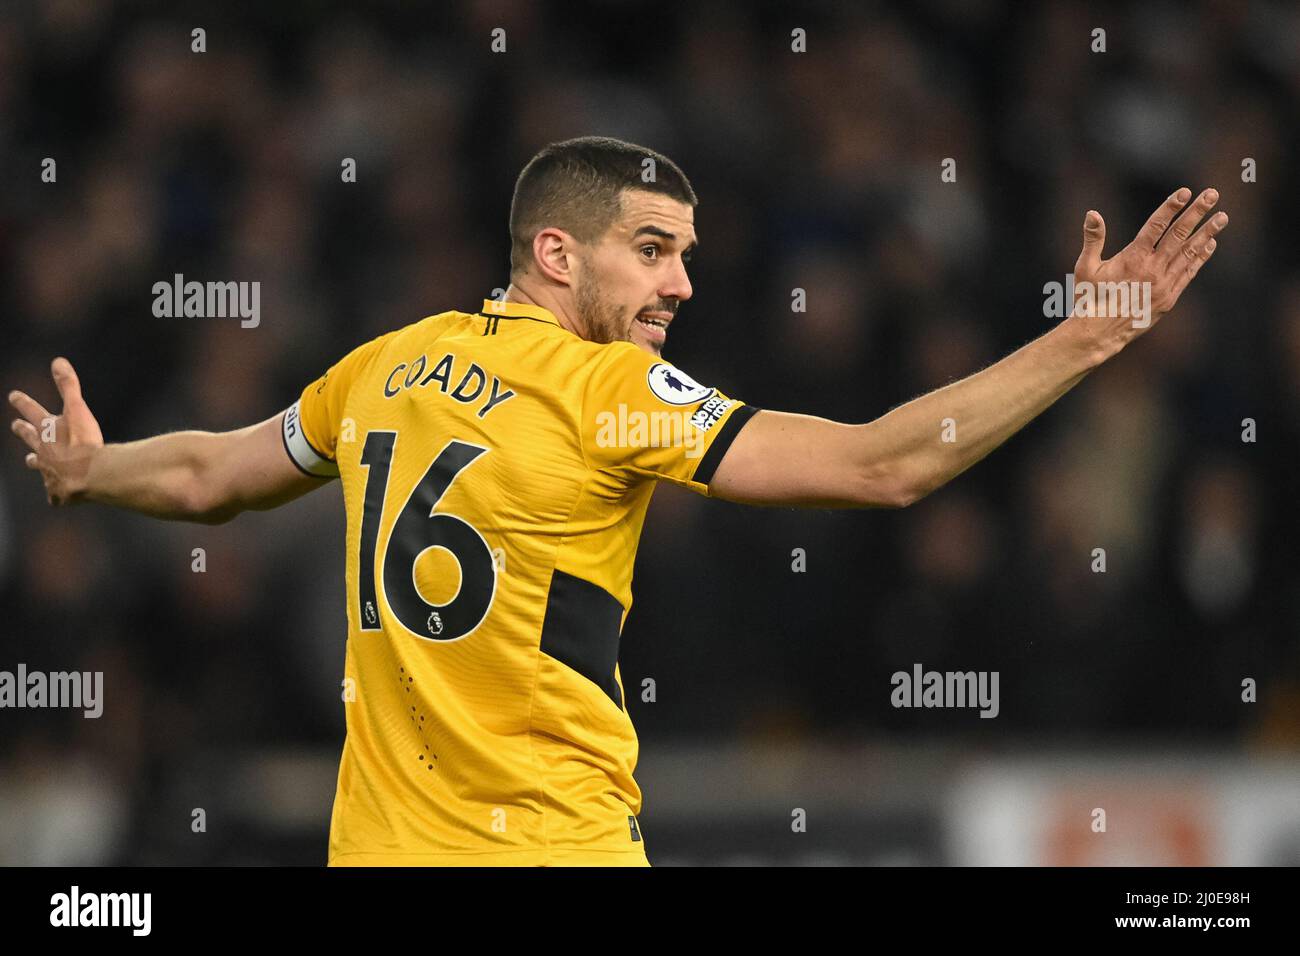 Wolverhampton, UK. 18th Mar, 2022. Conor Coady #16 of Wolverhampton Wanderers reacts during the game in Wolverhampton, United Kingdom on 3/18/2022. (Photo by Craig Thomas/News Images/Sipa USA) Credit: Sipa USA/Alamy Live News Stock Photo